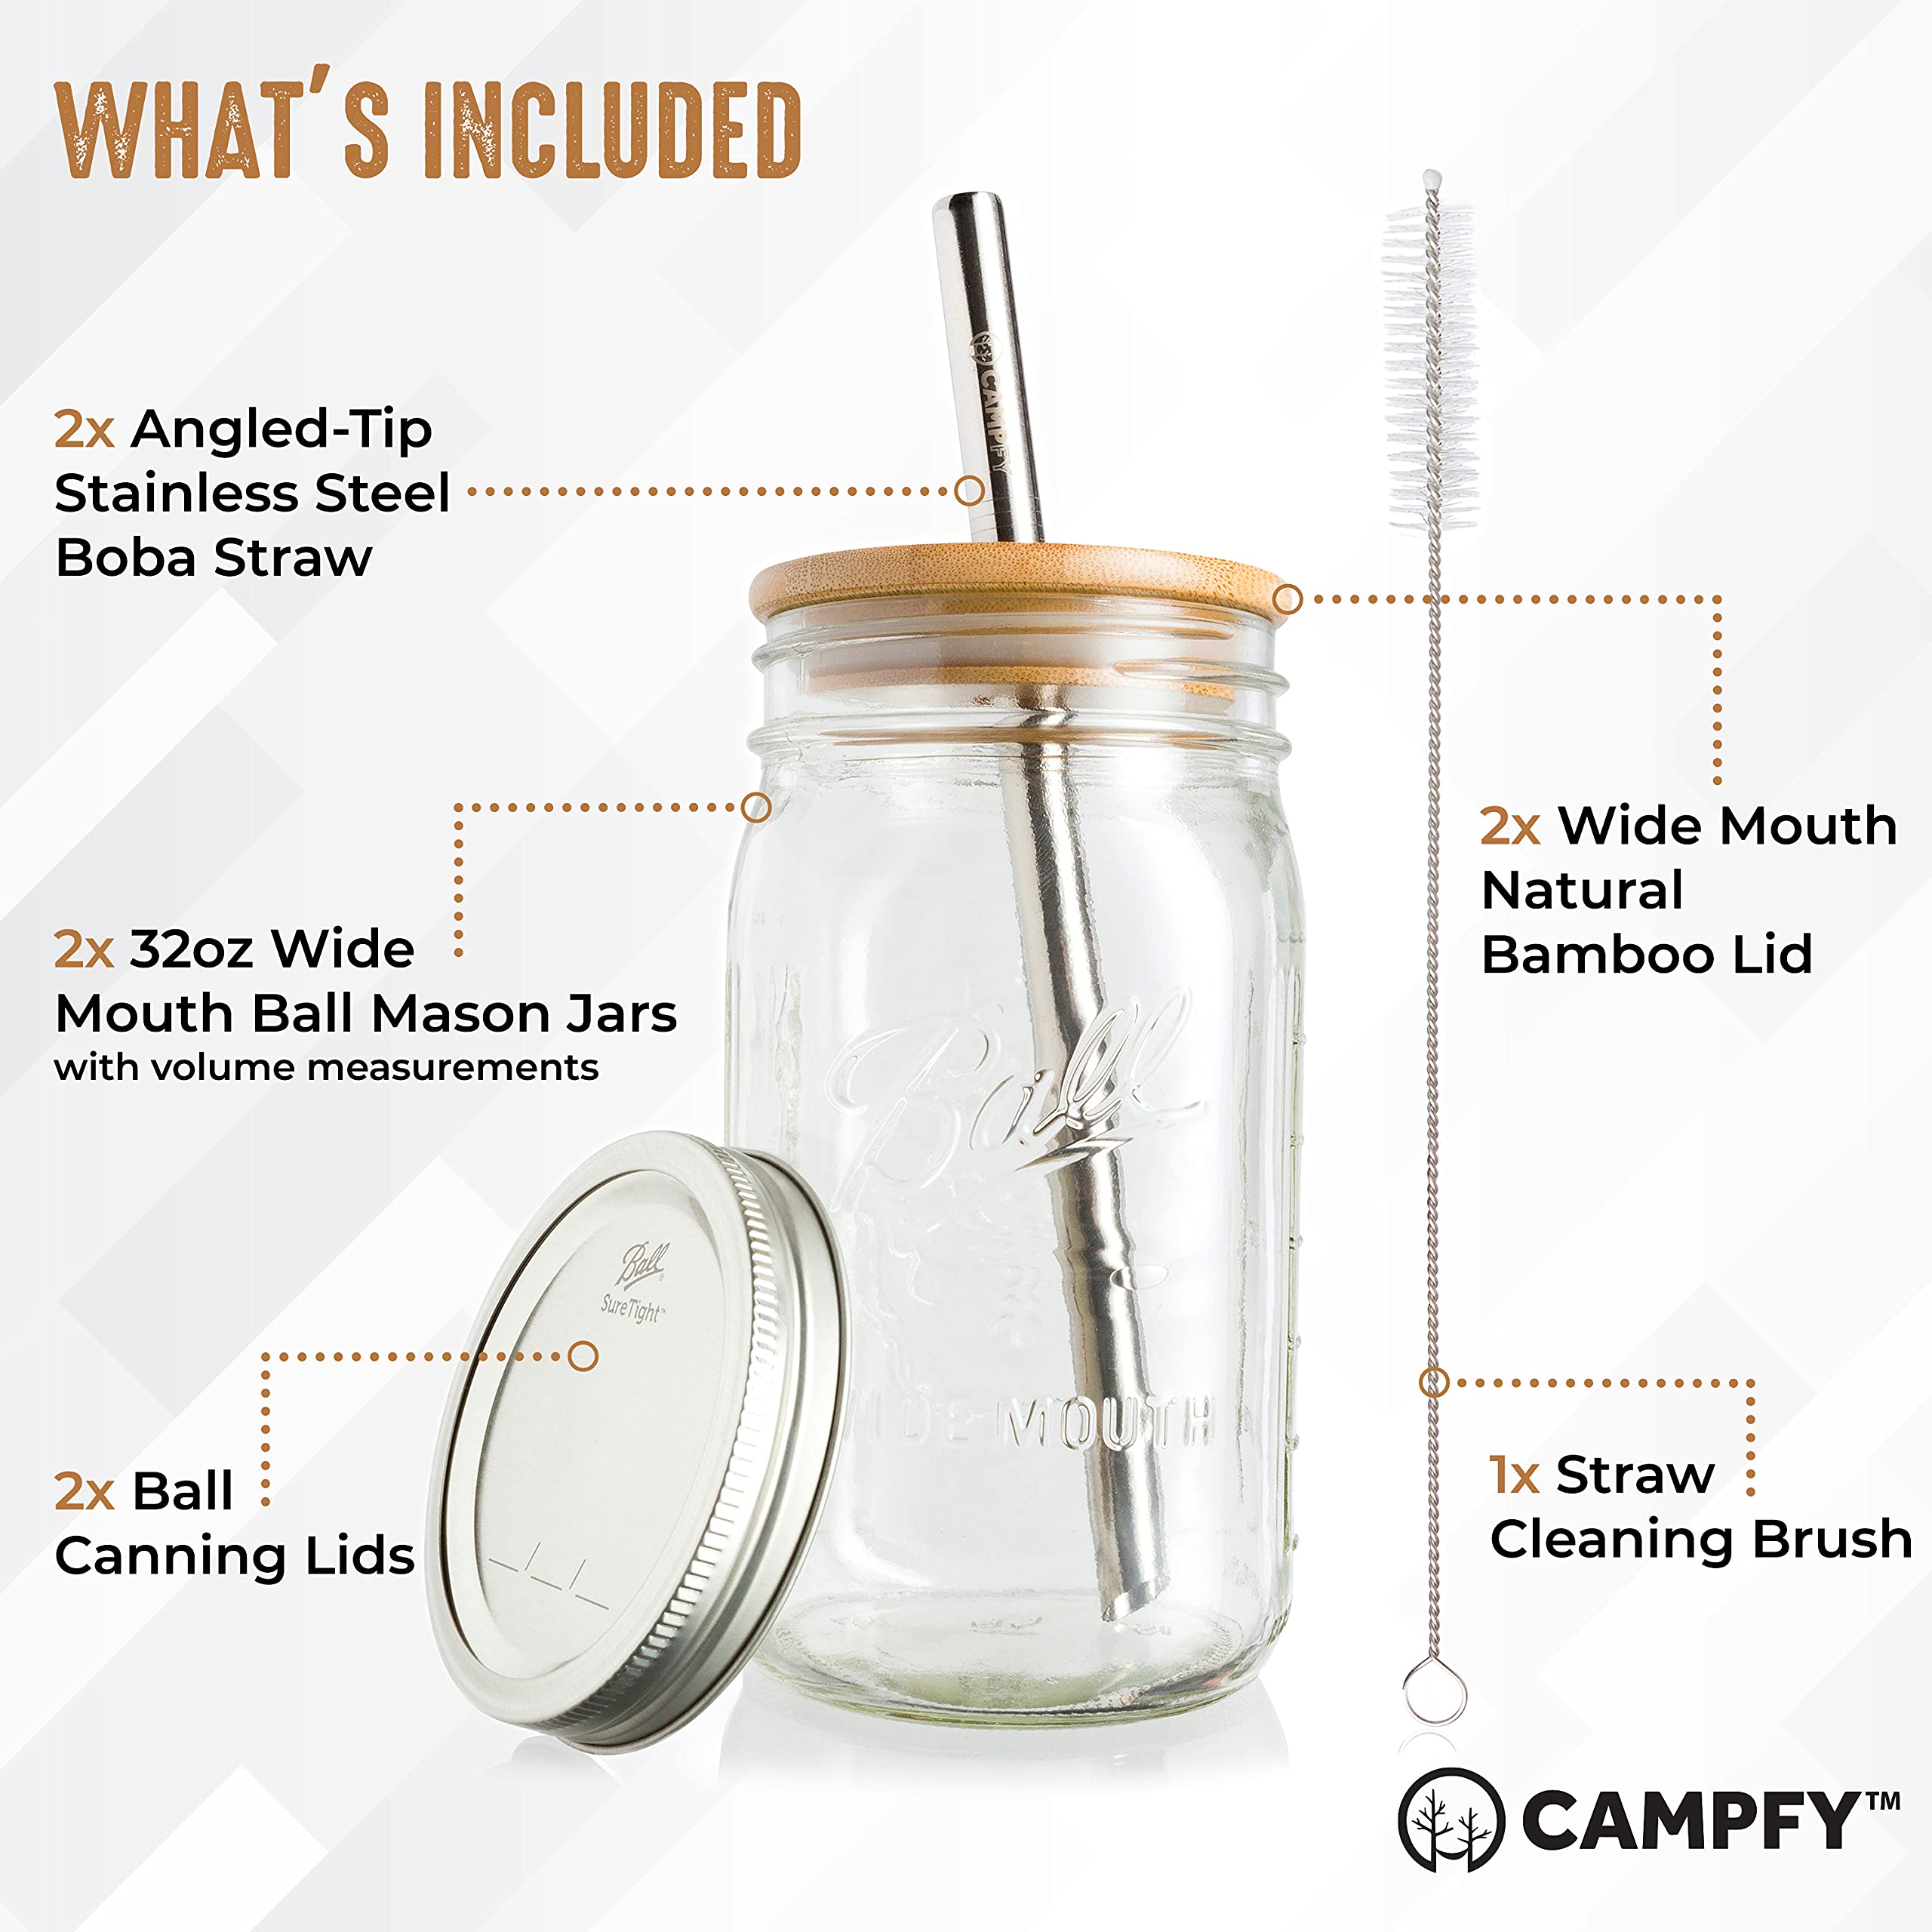 CAMPFY Reusable Boba Cup with Lids and Straw - Bubble Tea Cup - Boba Tea Cup - Smoothie Cup - 2 Glass Wide Mouth Ball Mason Jars 32oz with Bamboo Lids - 2 Angled-Tip Boba Straws